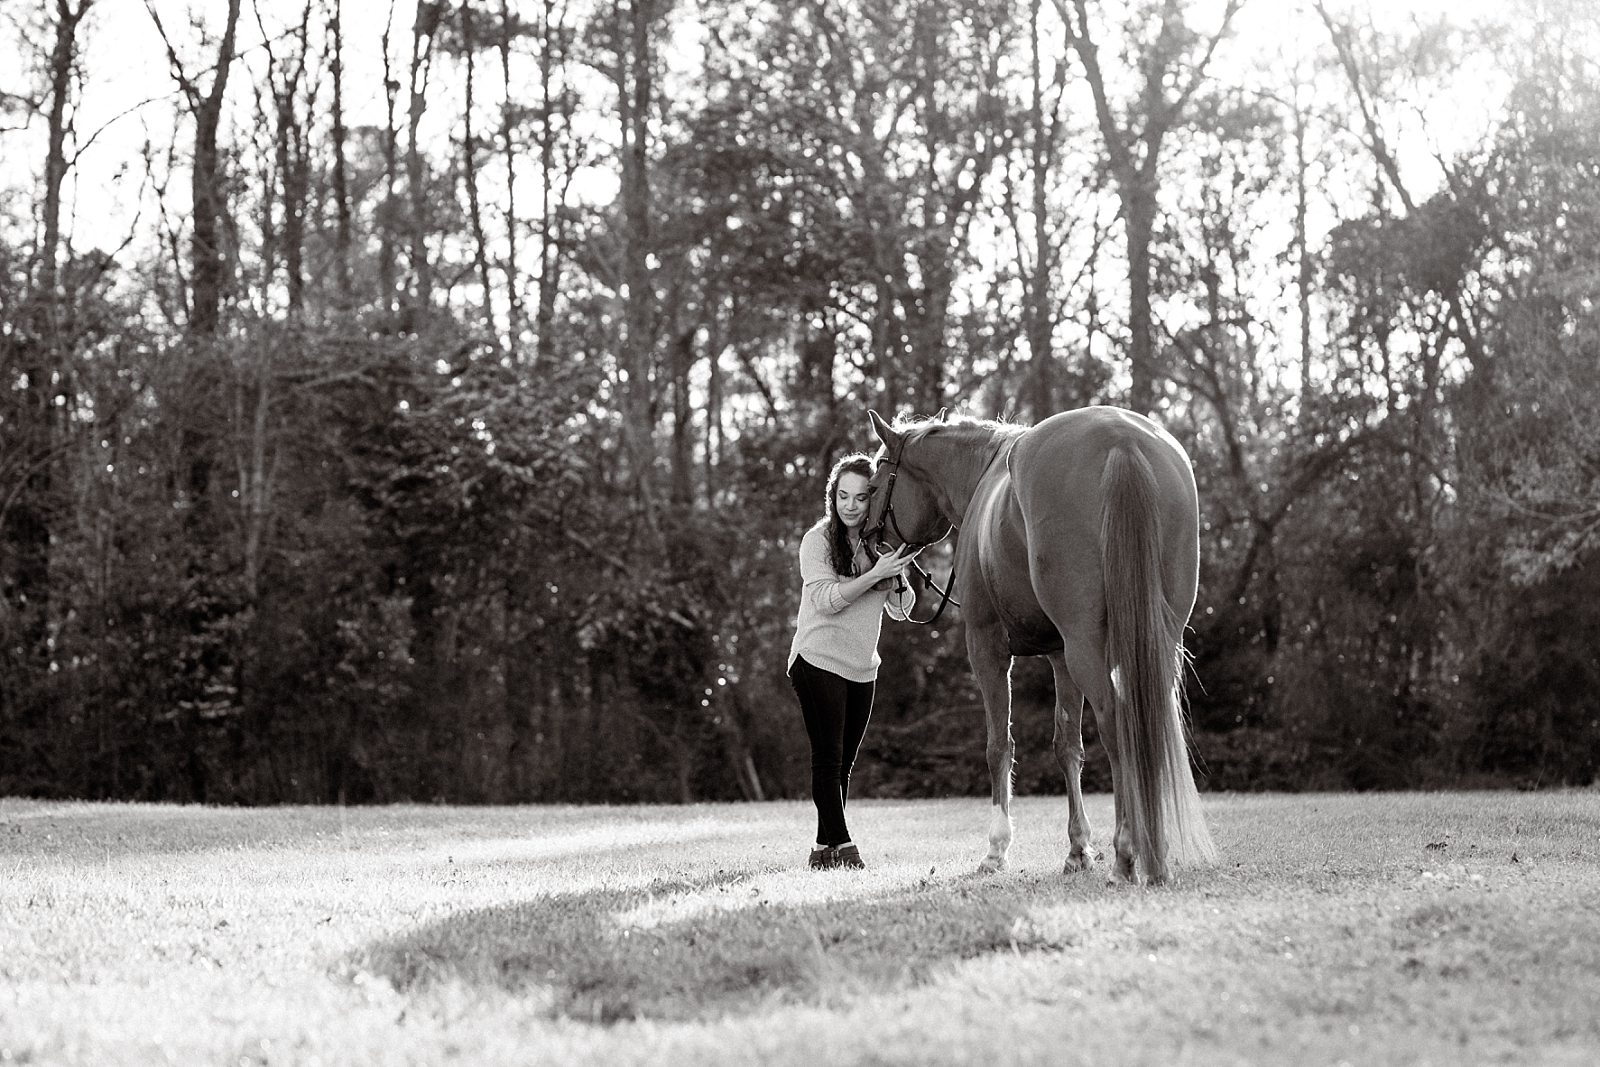 Dressage photographer in North Florida. Spoon Blue Stables in Tallahassee, FL. Chestnut warmblood cross mare. Simple outfit ideas for photos with your horse.